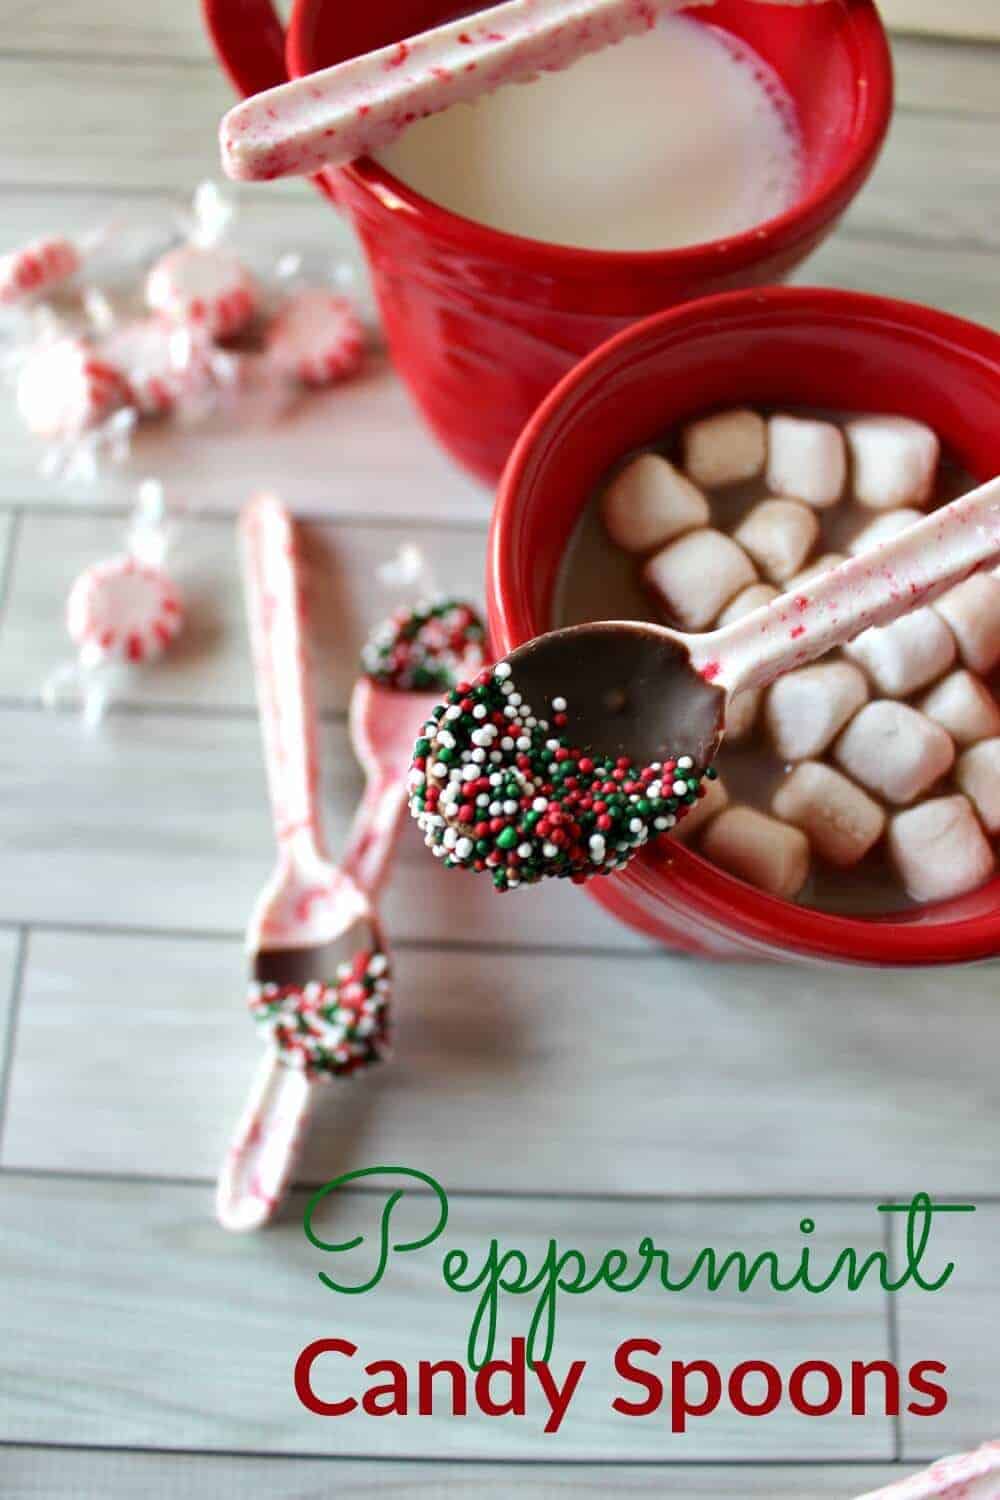 peppermint candy spoons - an easy DIY gift and treat